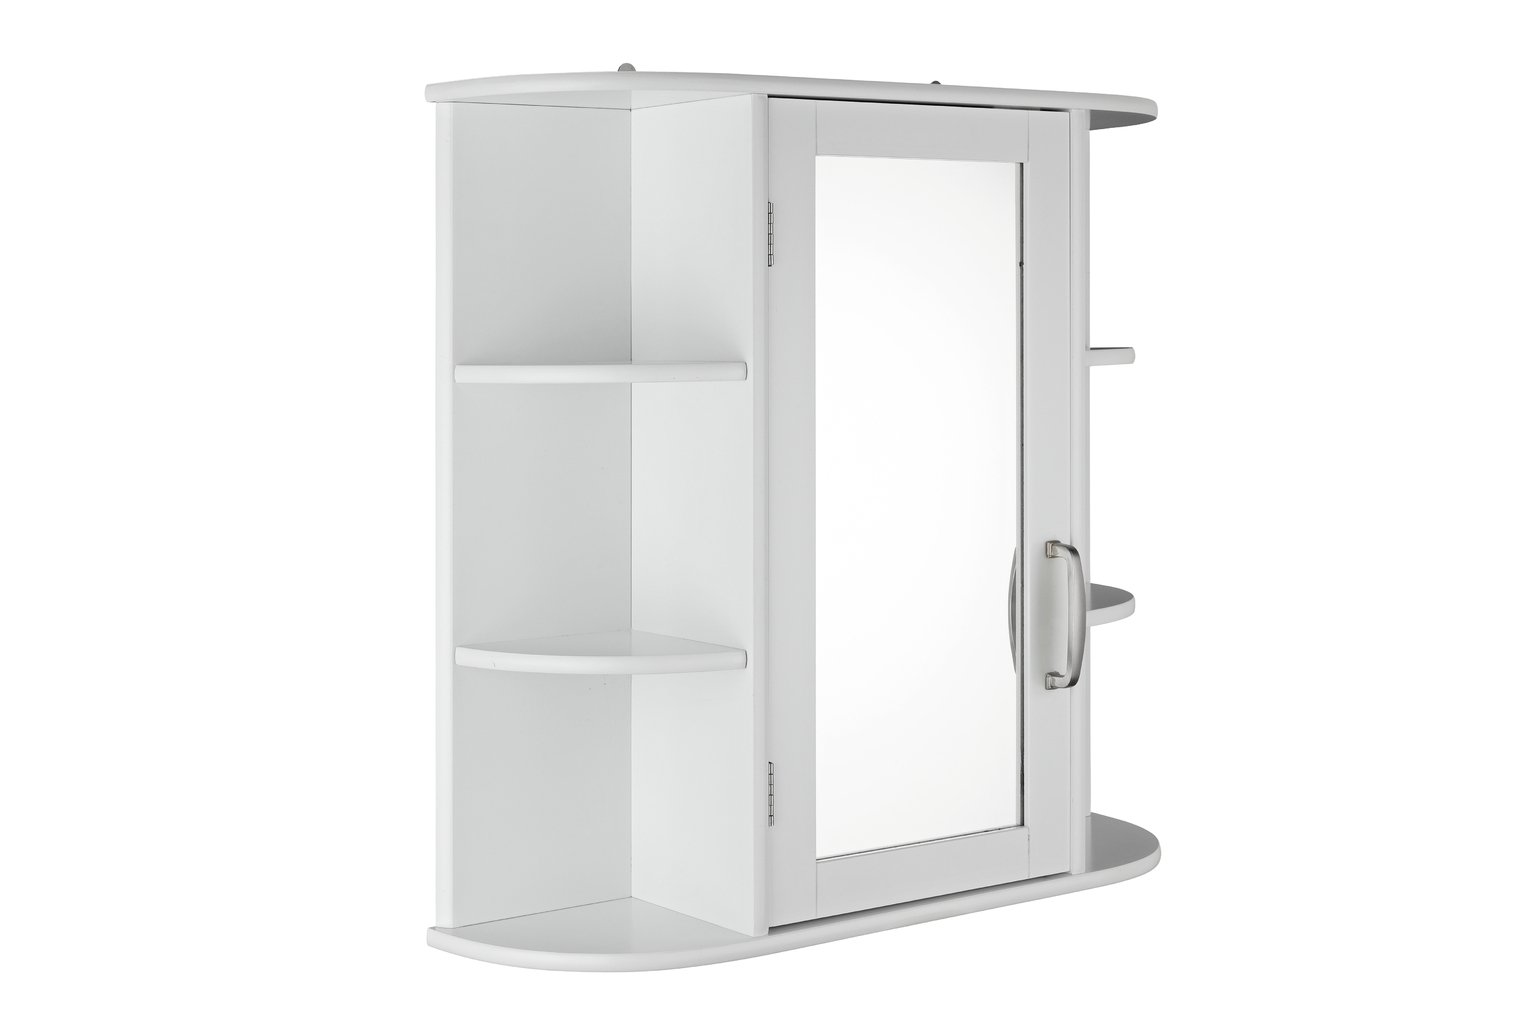 Argos Home Mirrored Cabinet with Shelves - White